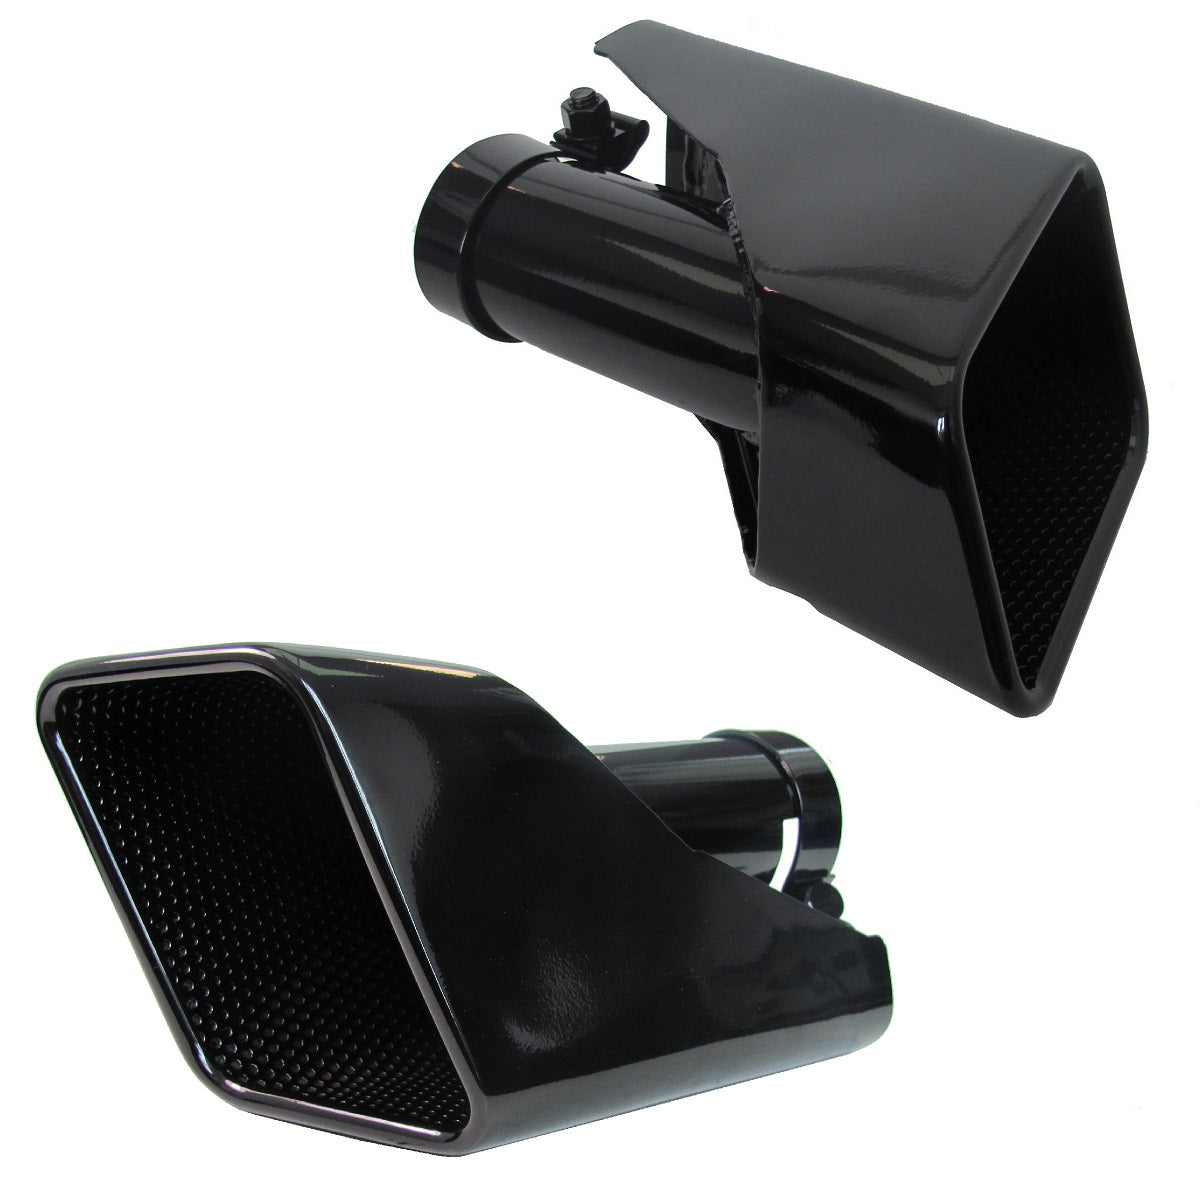 HST Style Exhaust Tips for Range Rover Sport - Petrol - Black